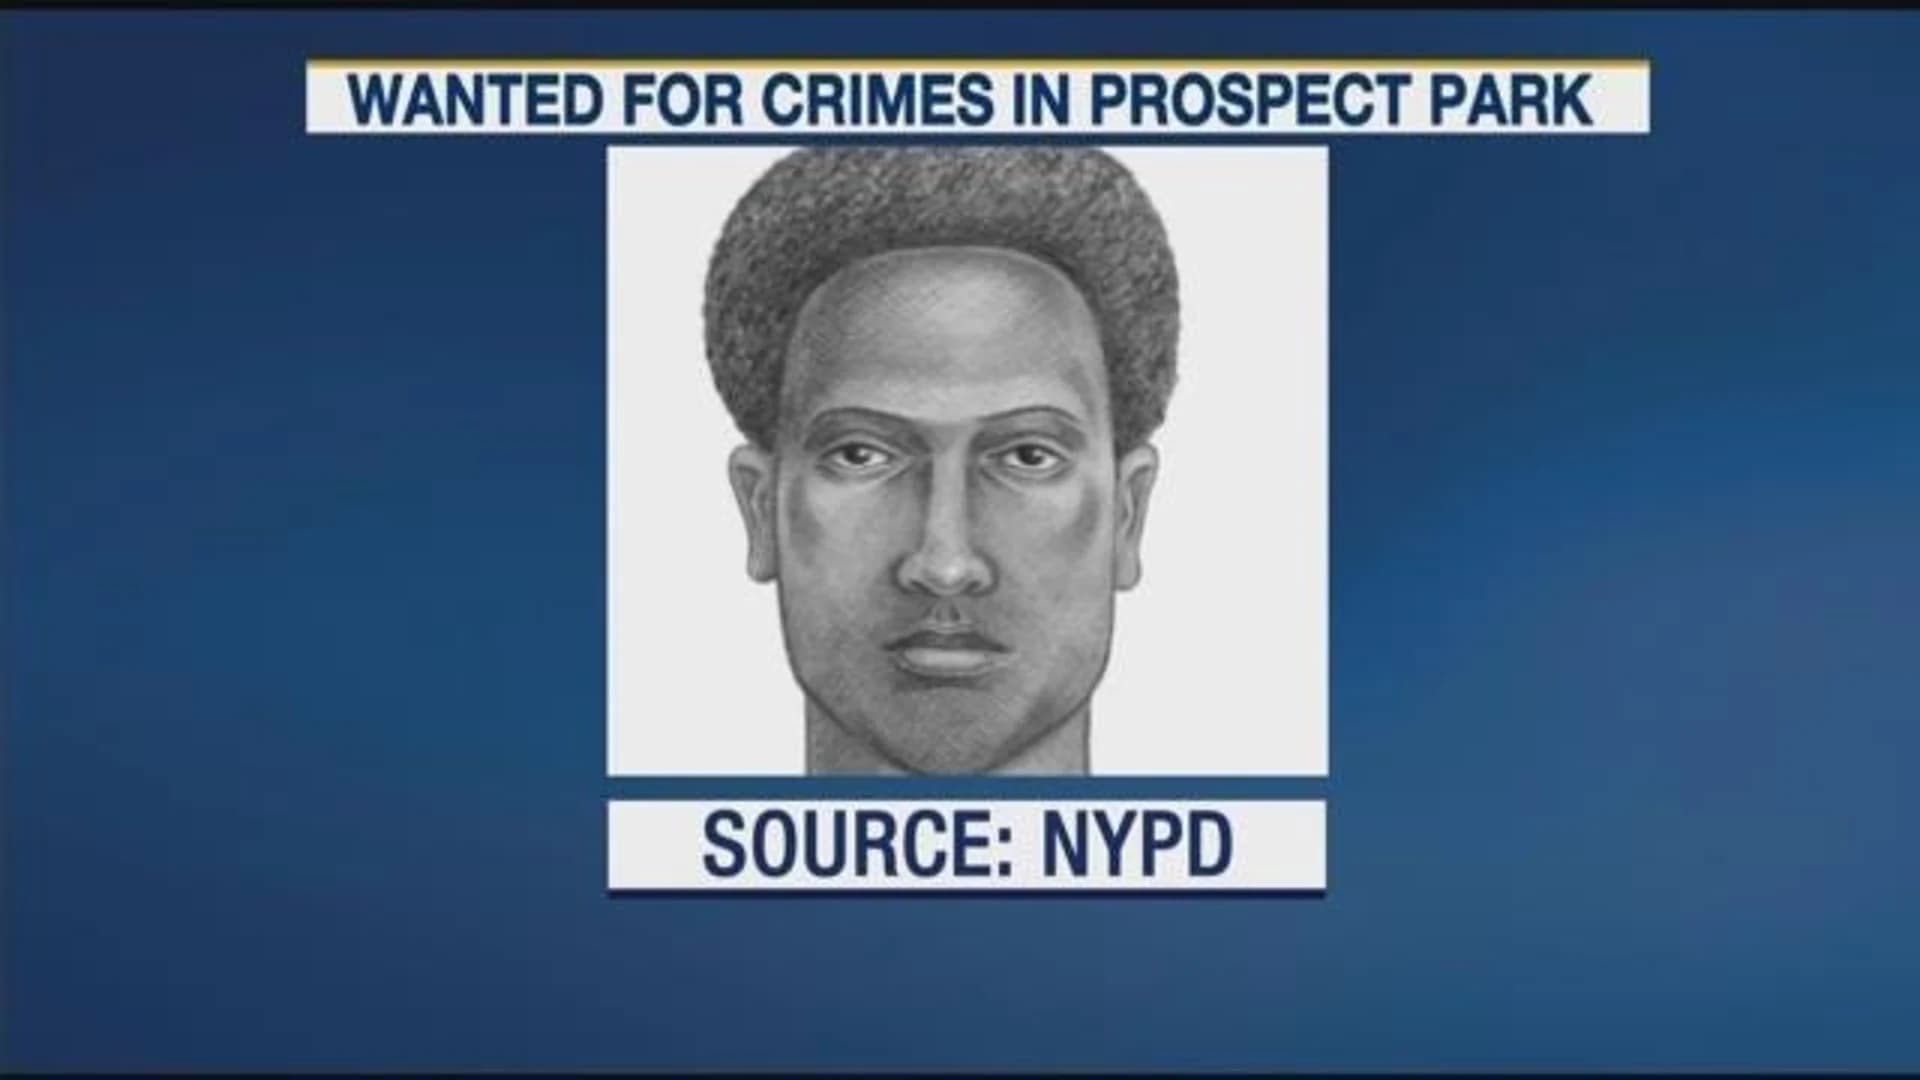 Police: Man wanted for pulling women’s hair, demanding sexual acts in Prospect Park